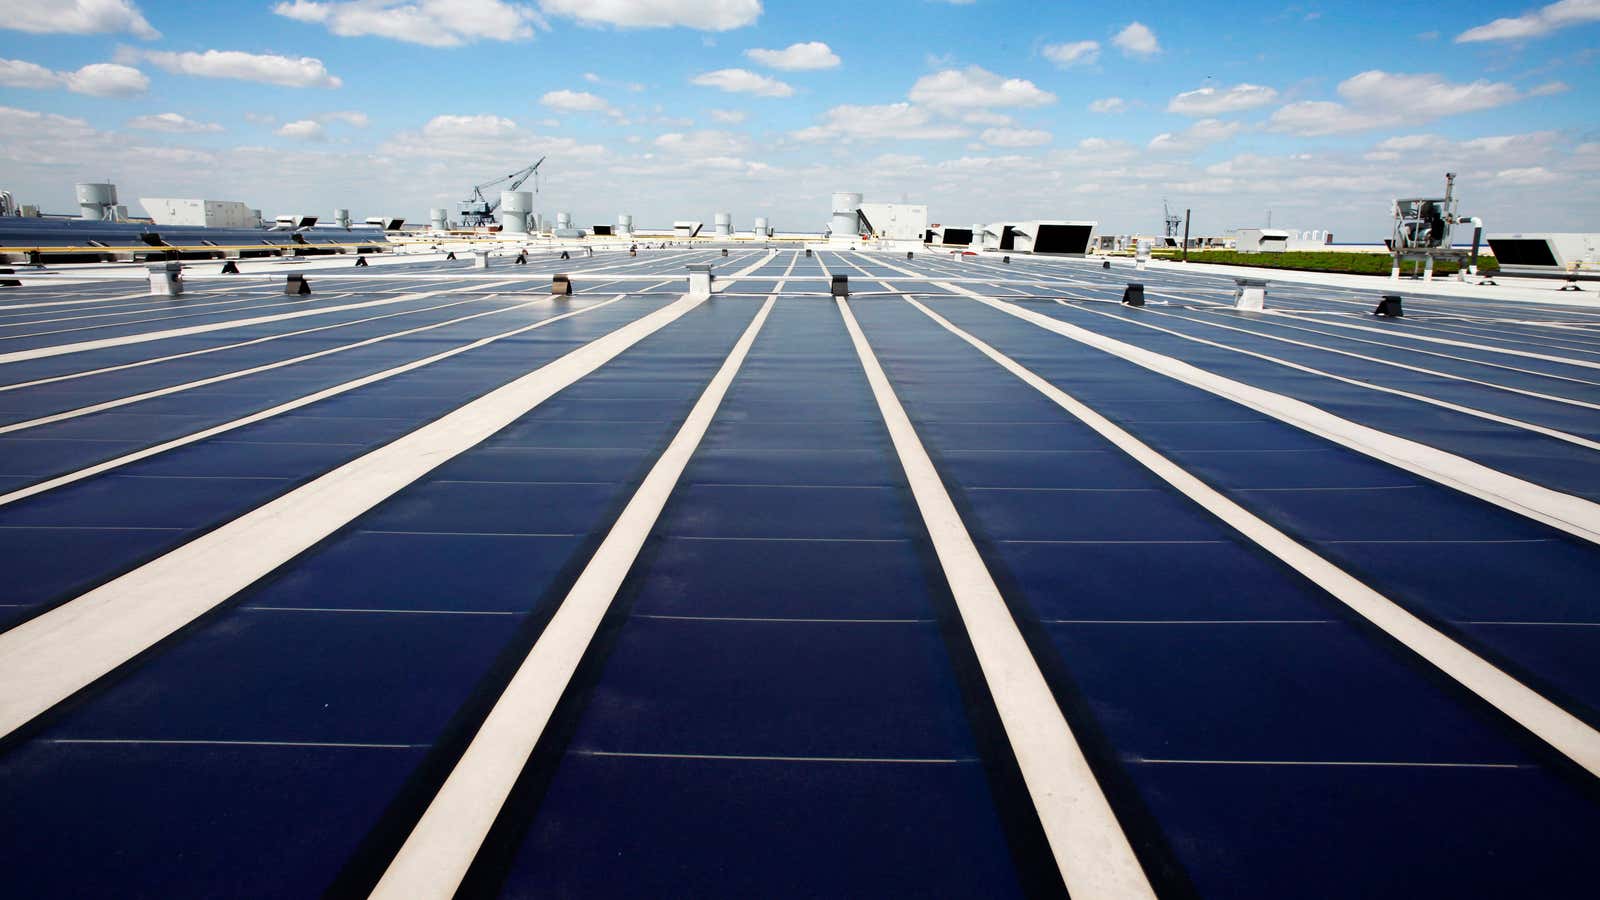 Rooftop solar panels on an IKEA help save costs.